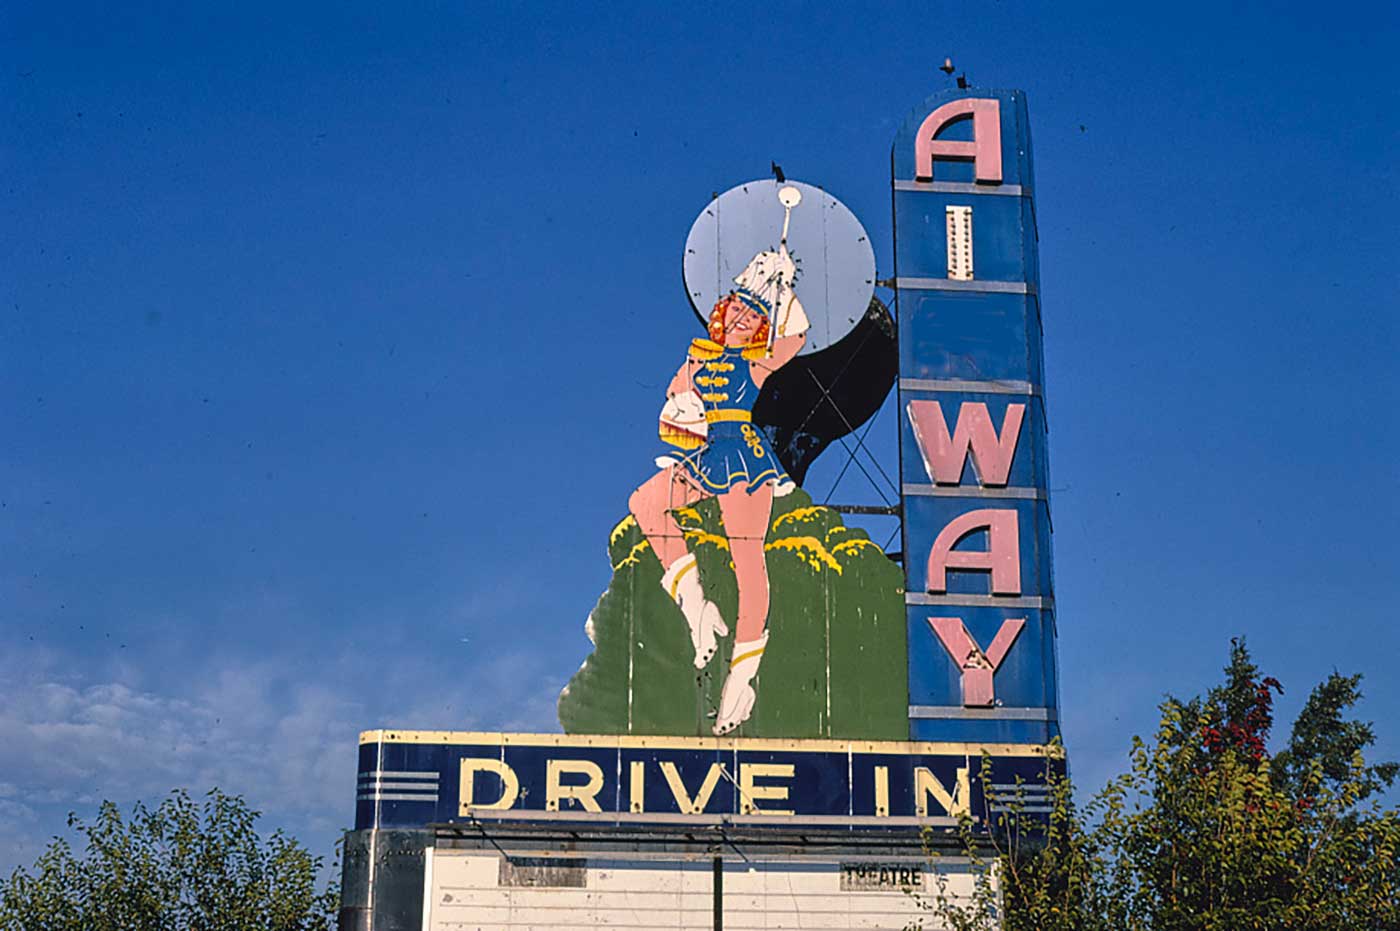 Old theater sign with a woman in a marching band uniform next to large letters reading vertically "AI WAY" below is an empty marquee for the movie title